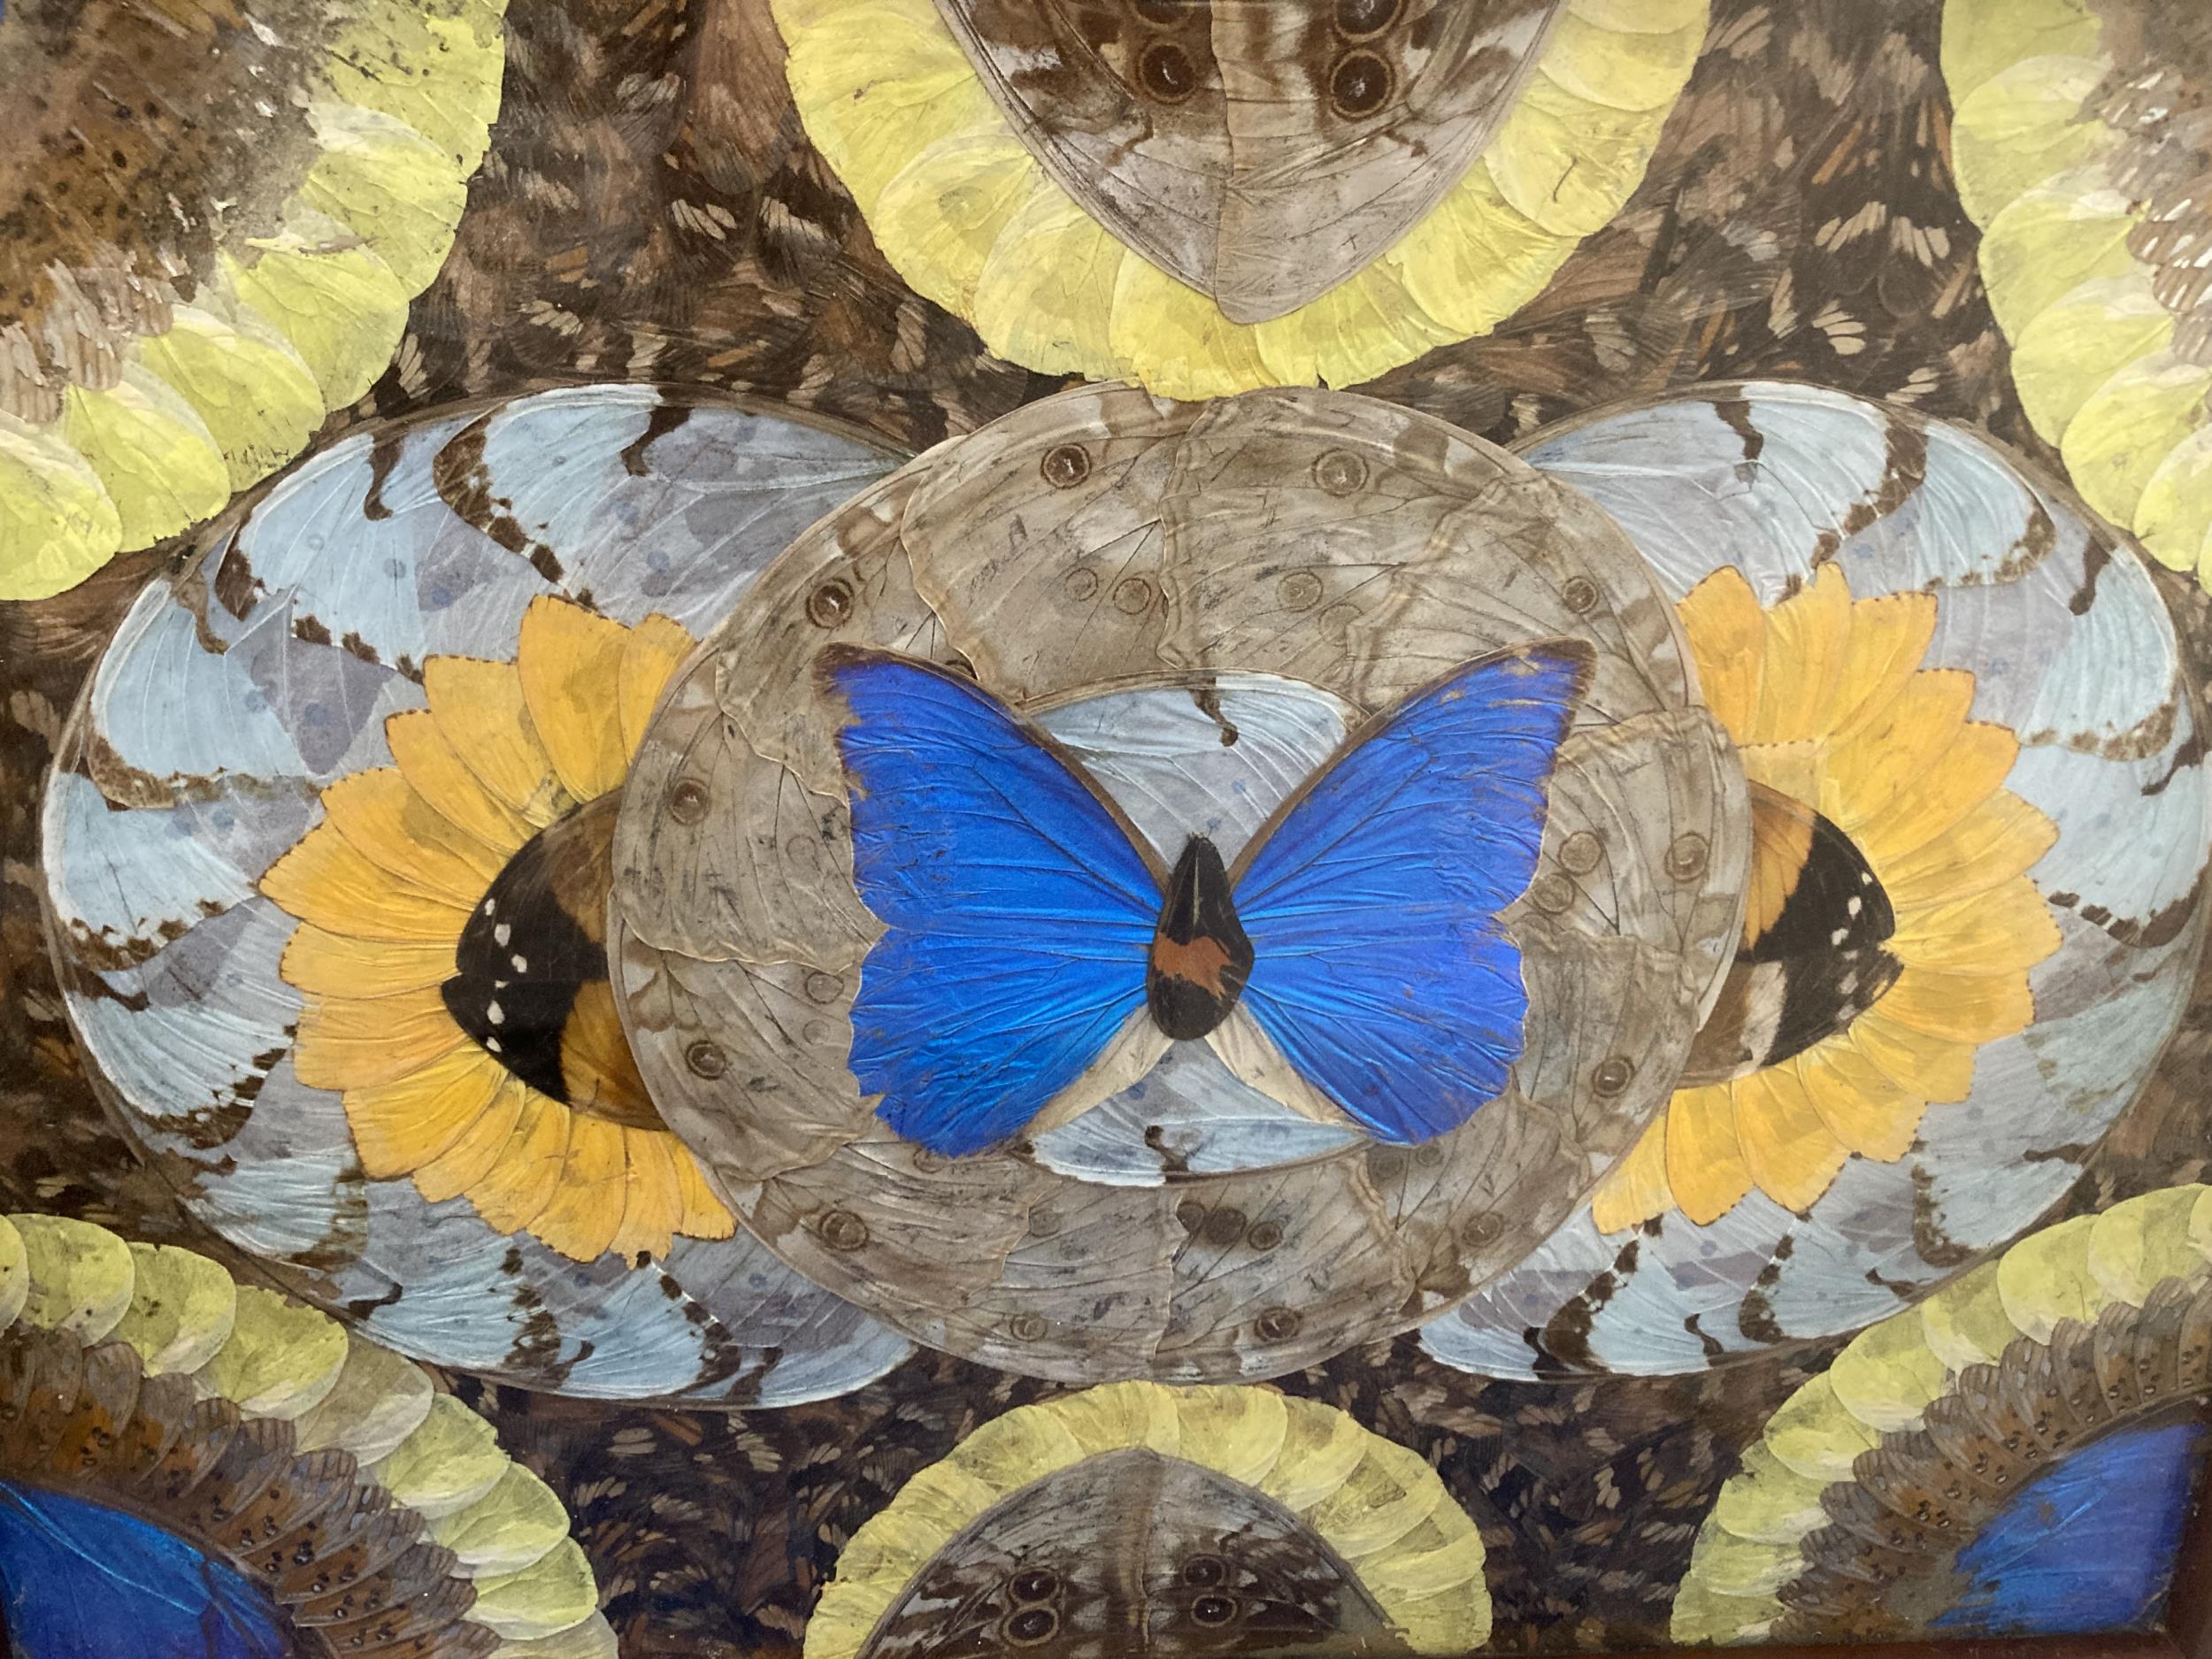 A VINTAGE INLAID WOODEN TRAY WITH BUTTERFLIES - Image 3 of 4